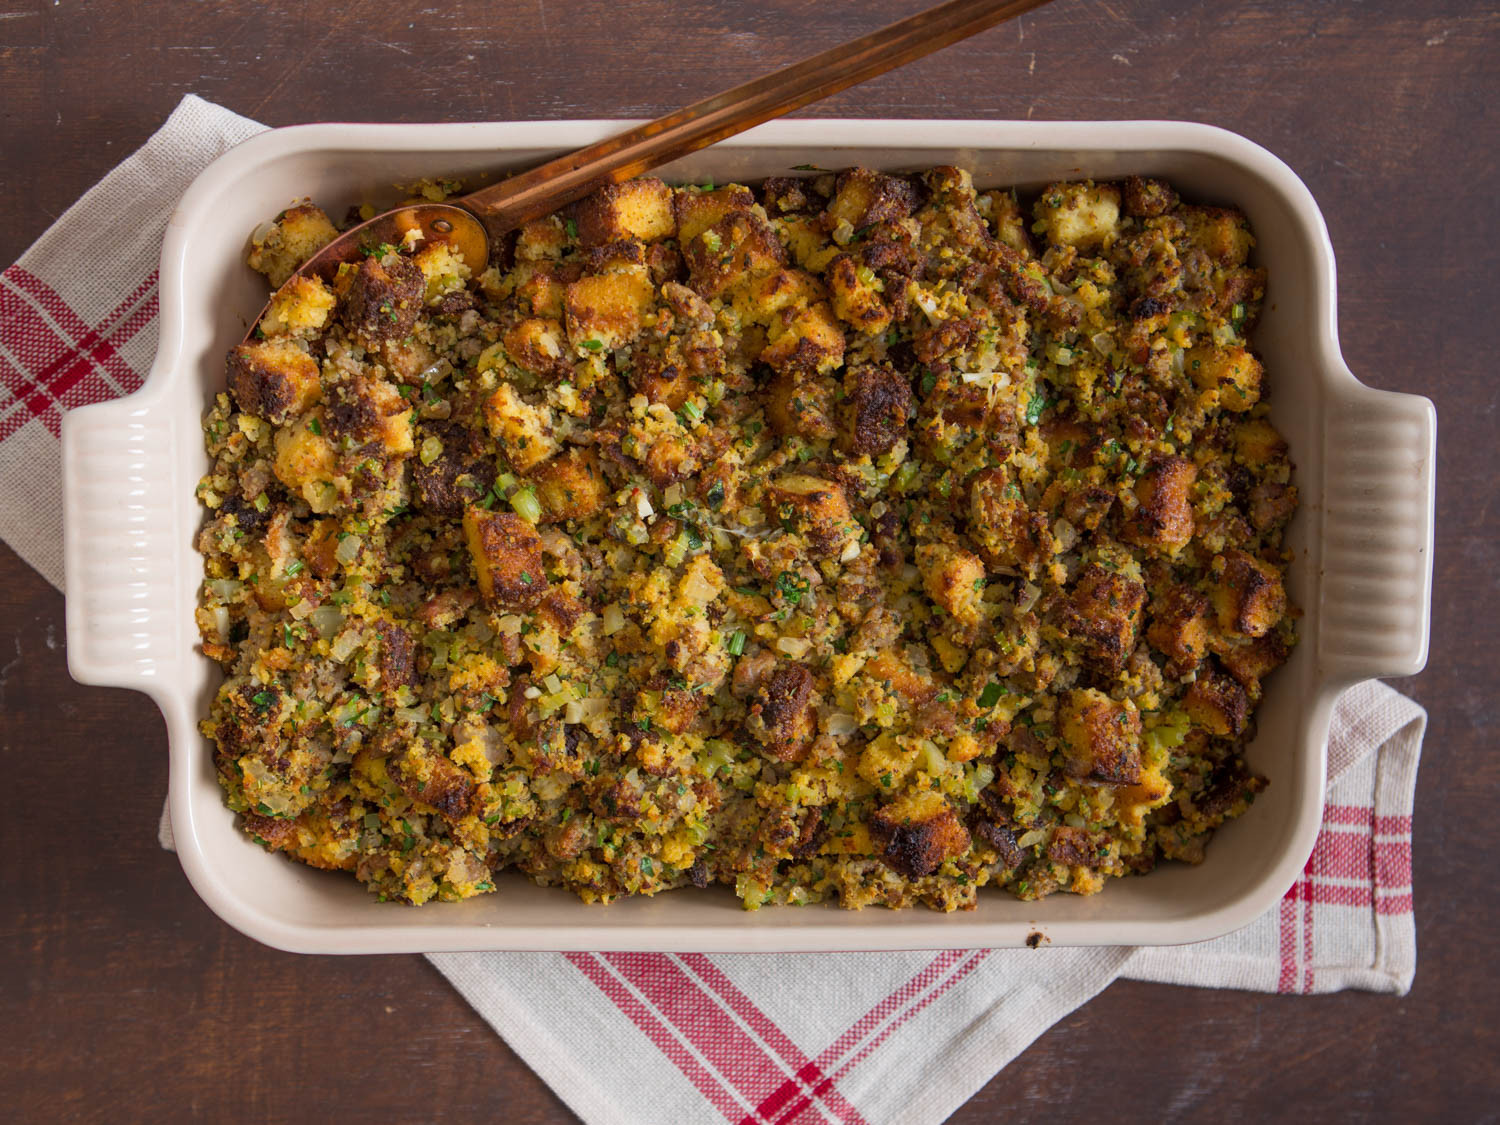 Cornbread Stuffing Recipes For Turkey
 Stuffing on the Side How to Make Southern Cornbread